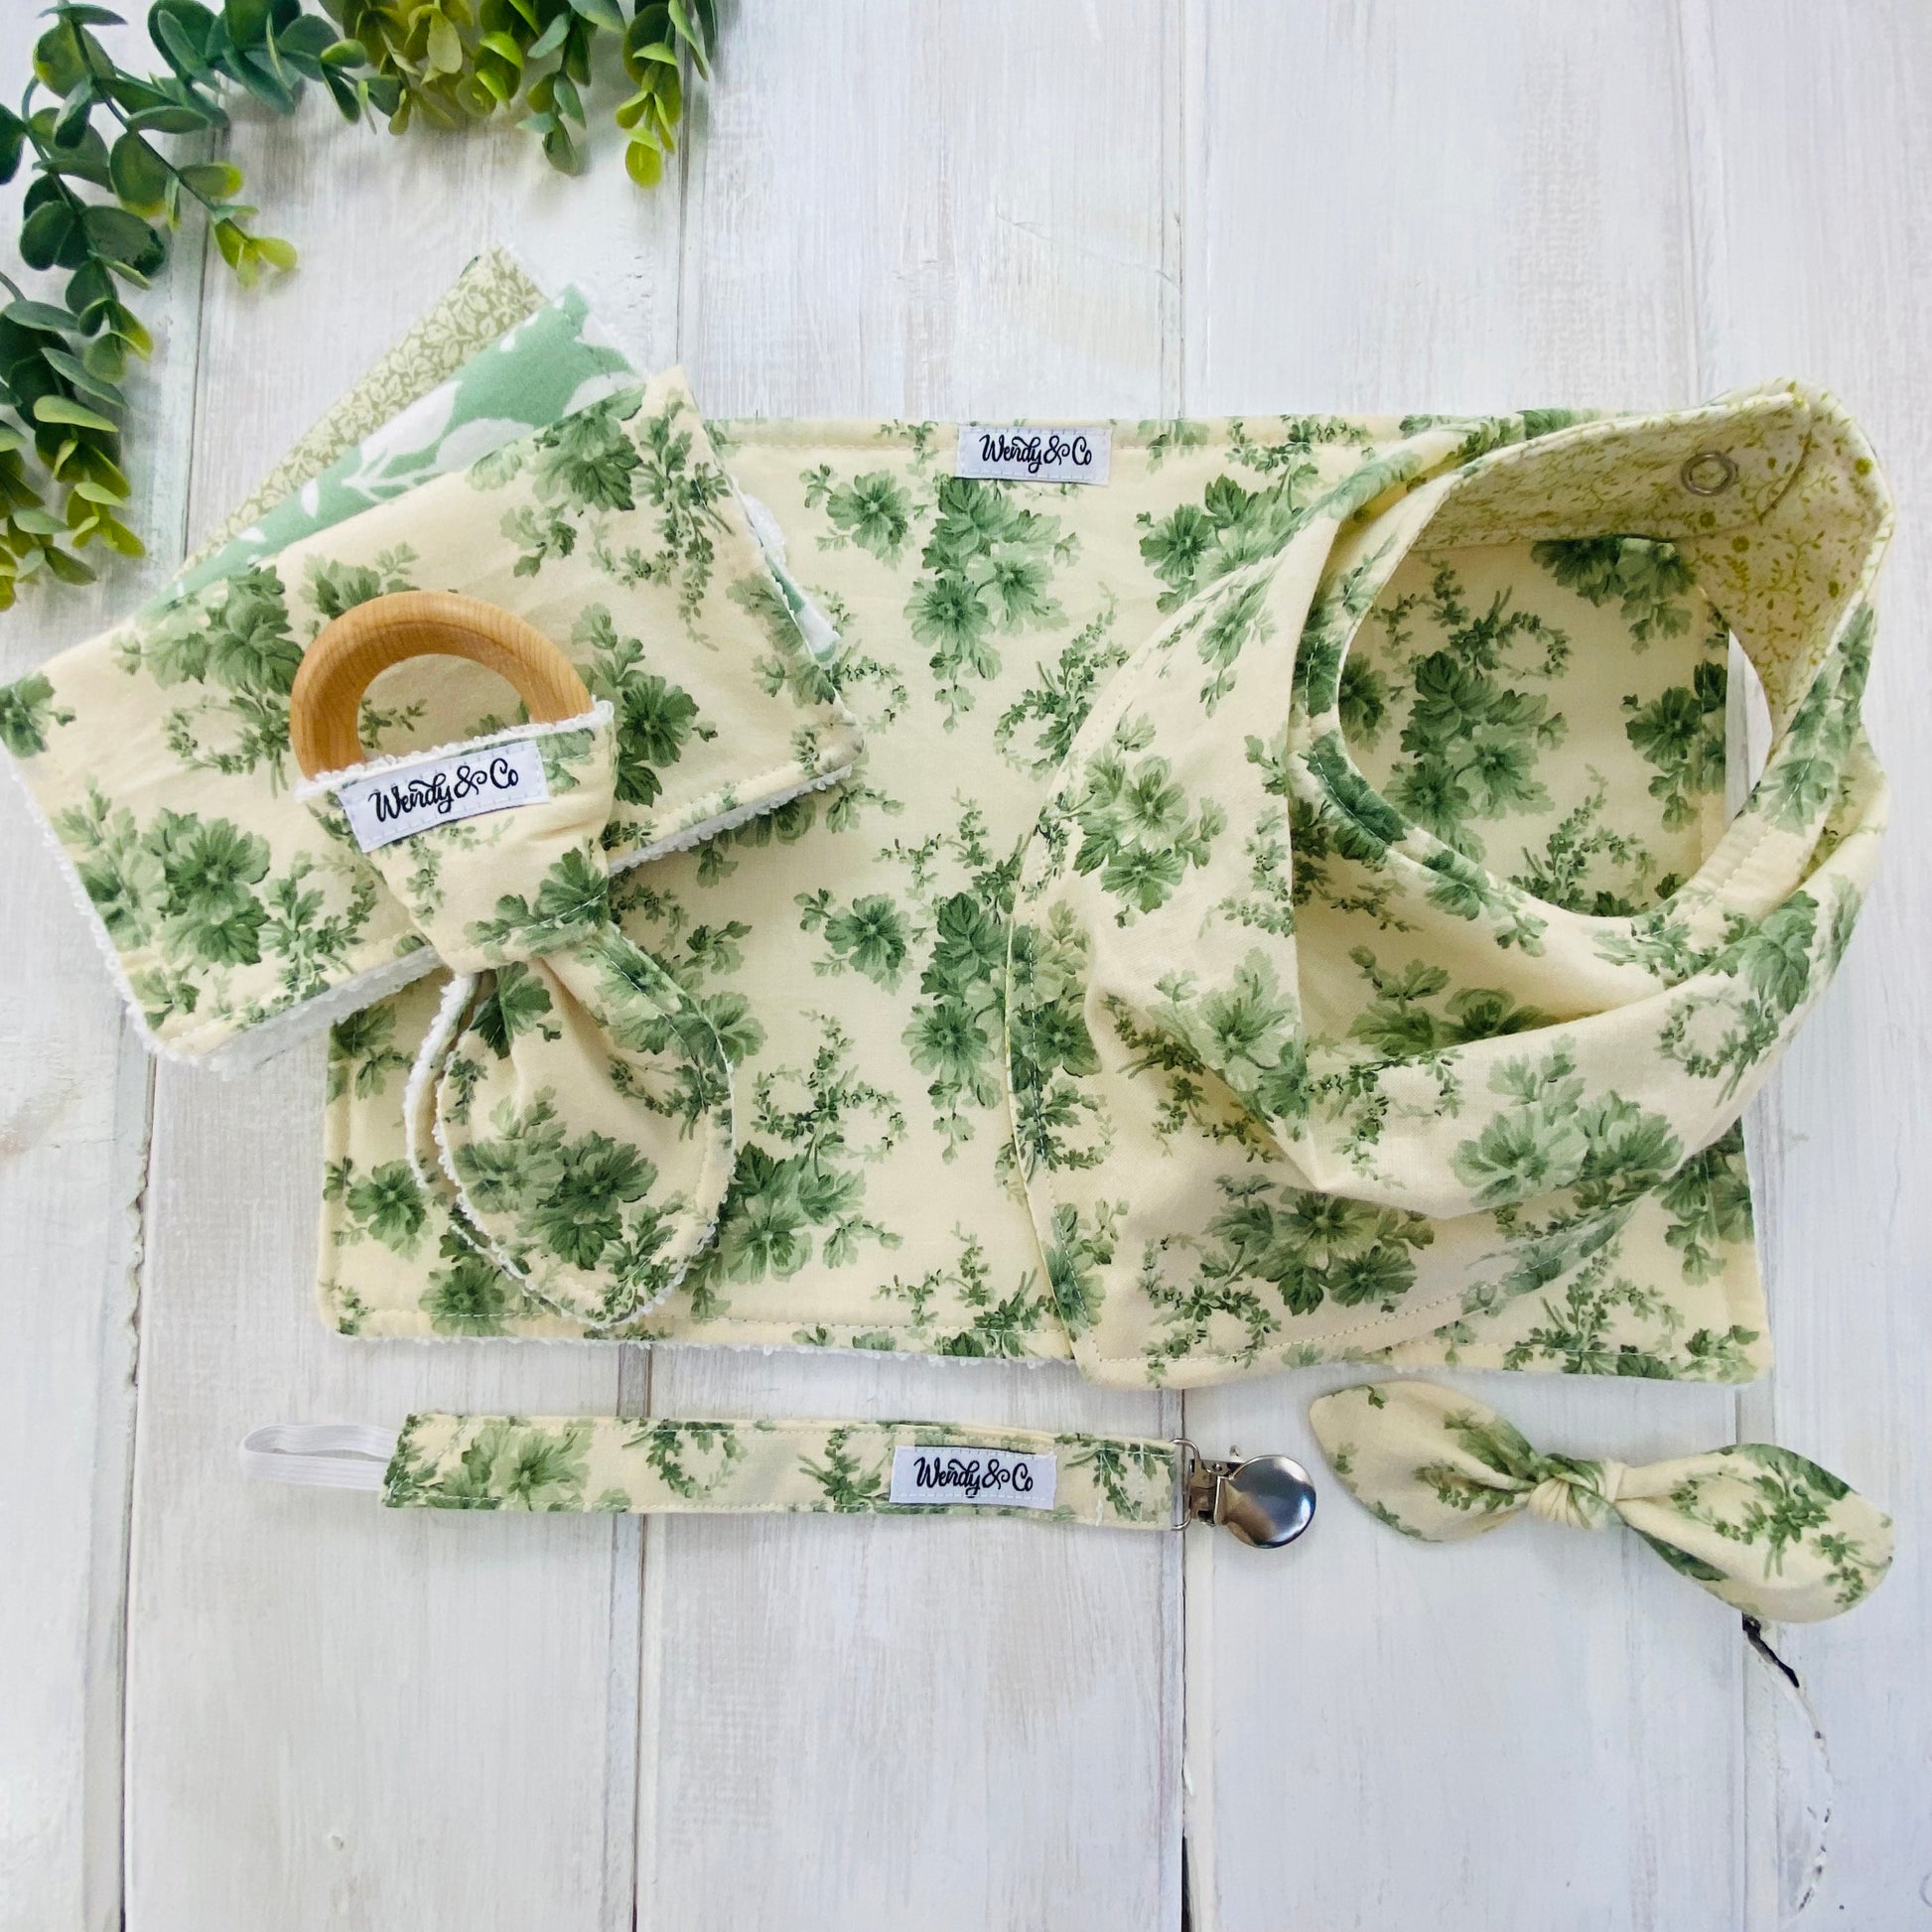 Beautiful heirloom sage floral baby gift set with bib, burp cloth, washing cloths, pacifier clip and teether.